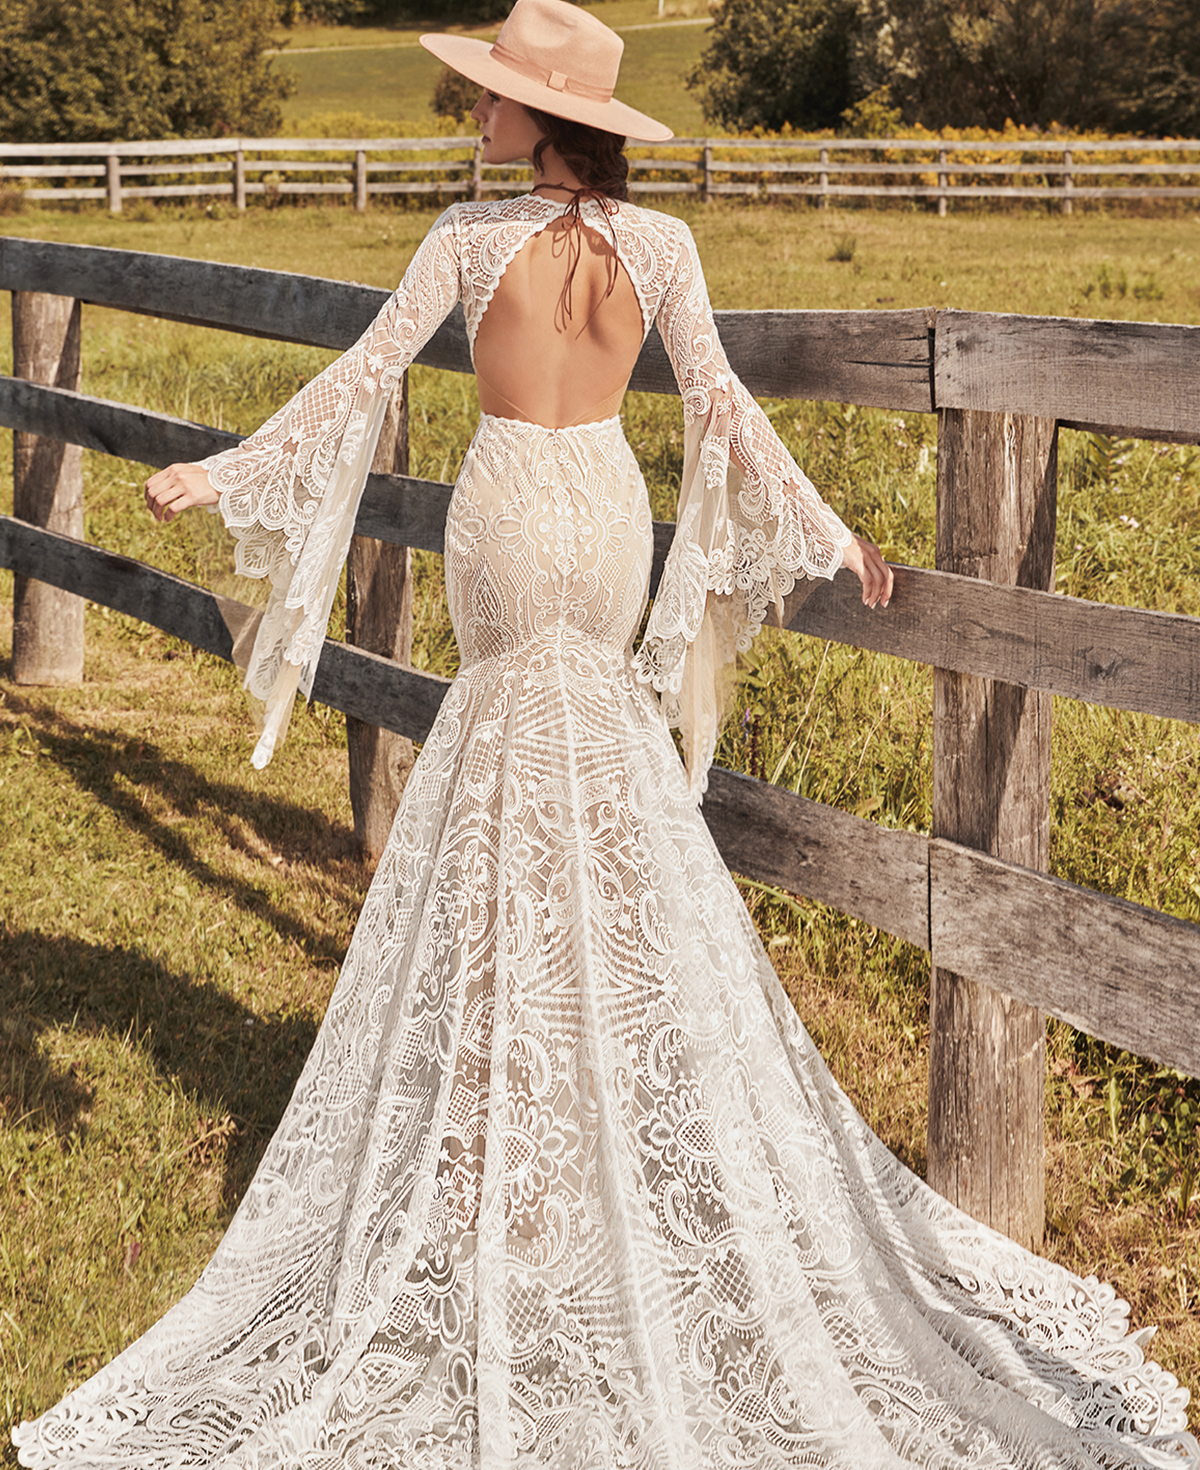 Rustic Boho Wedding Dress with Bell Sleeves and High Neckline